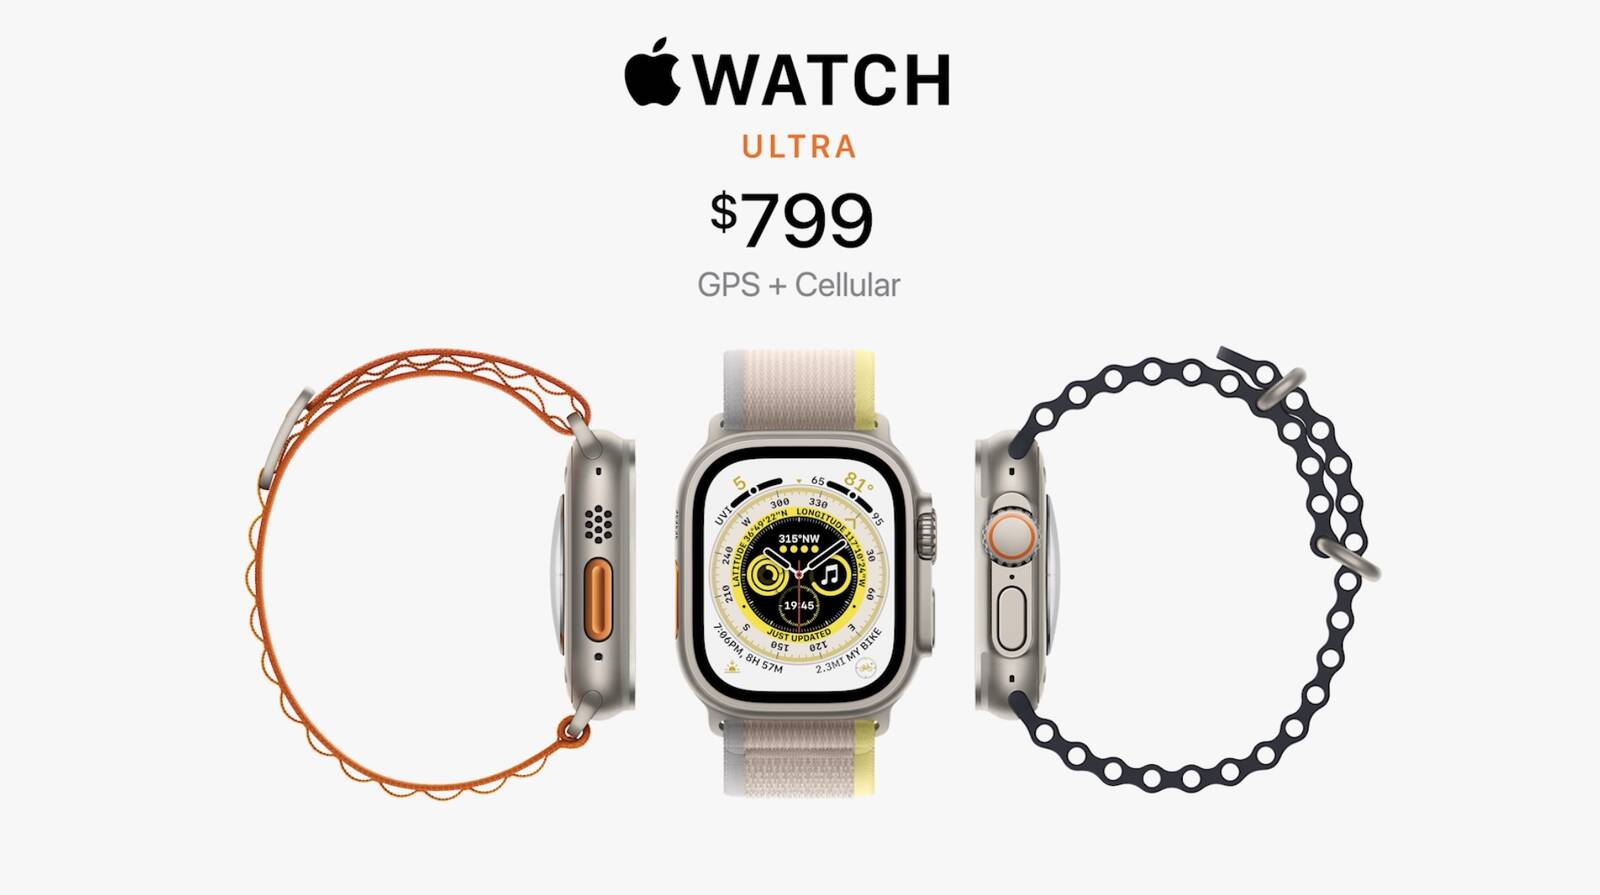 Apple Watch Ultra Starts at $799, Available to Order Today Ahead of September 23 Launch